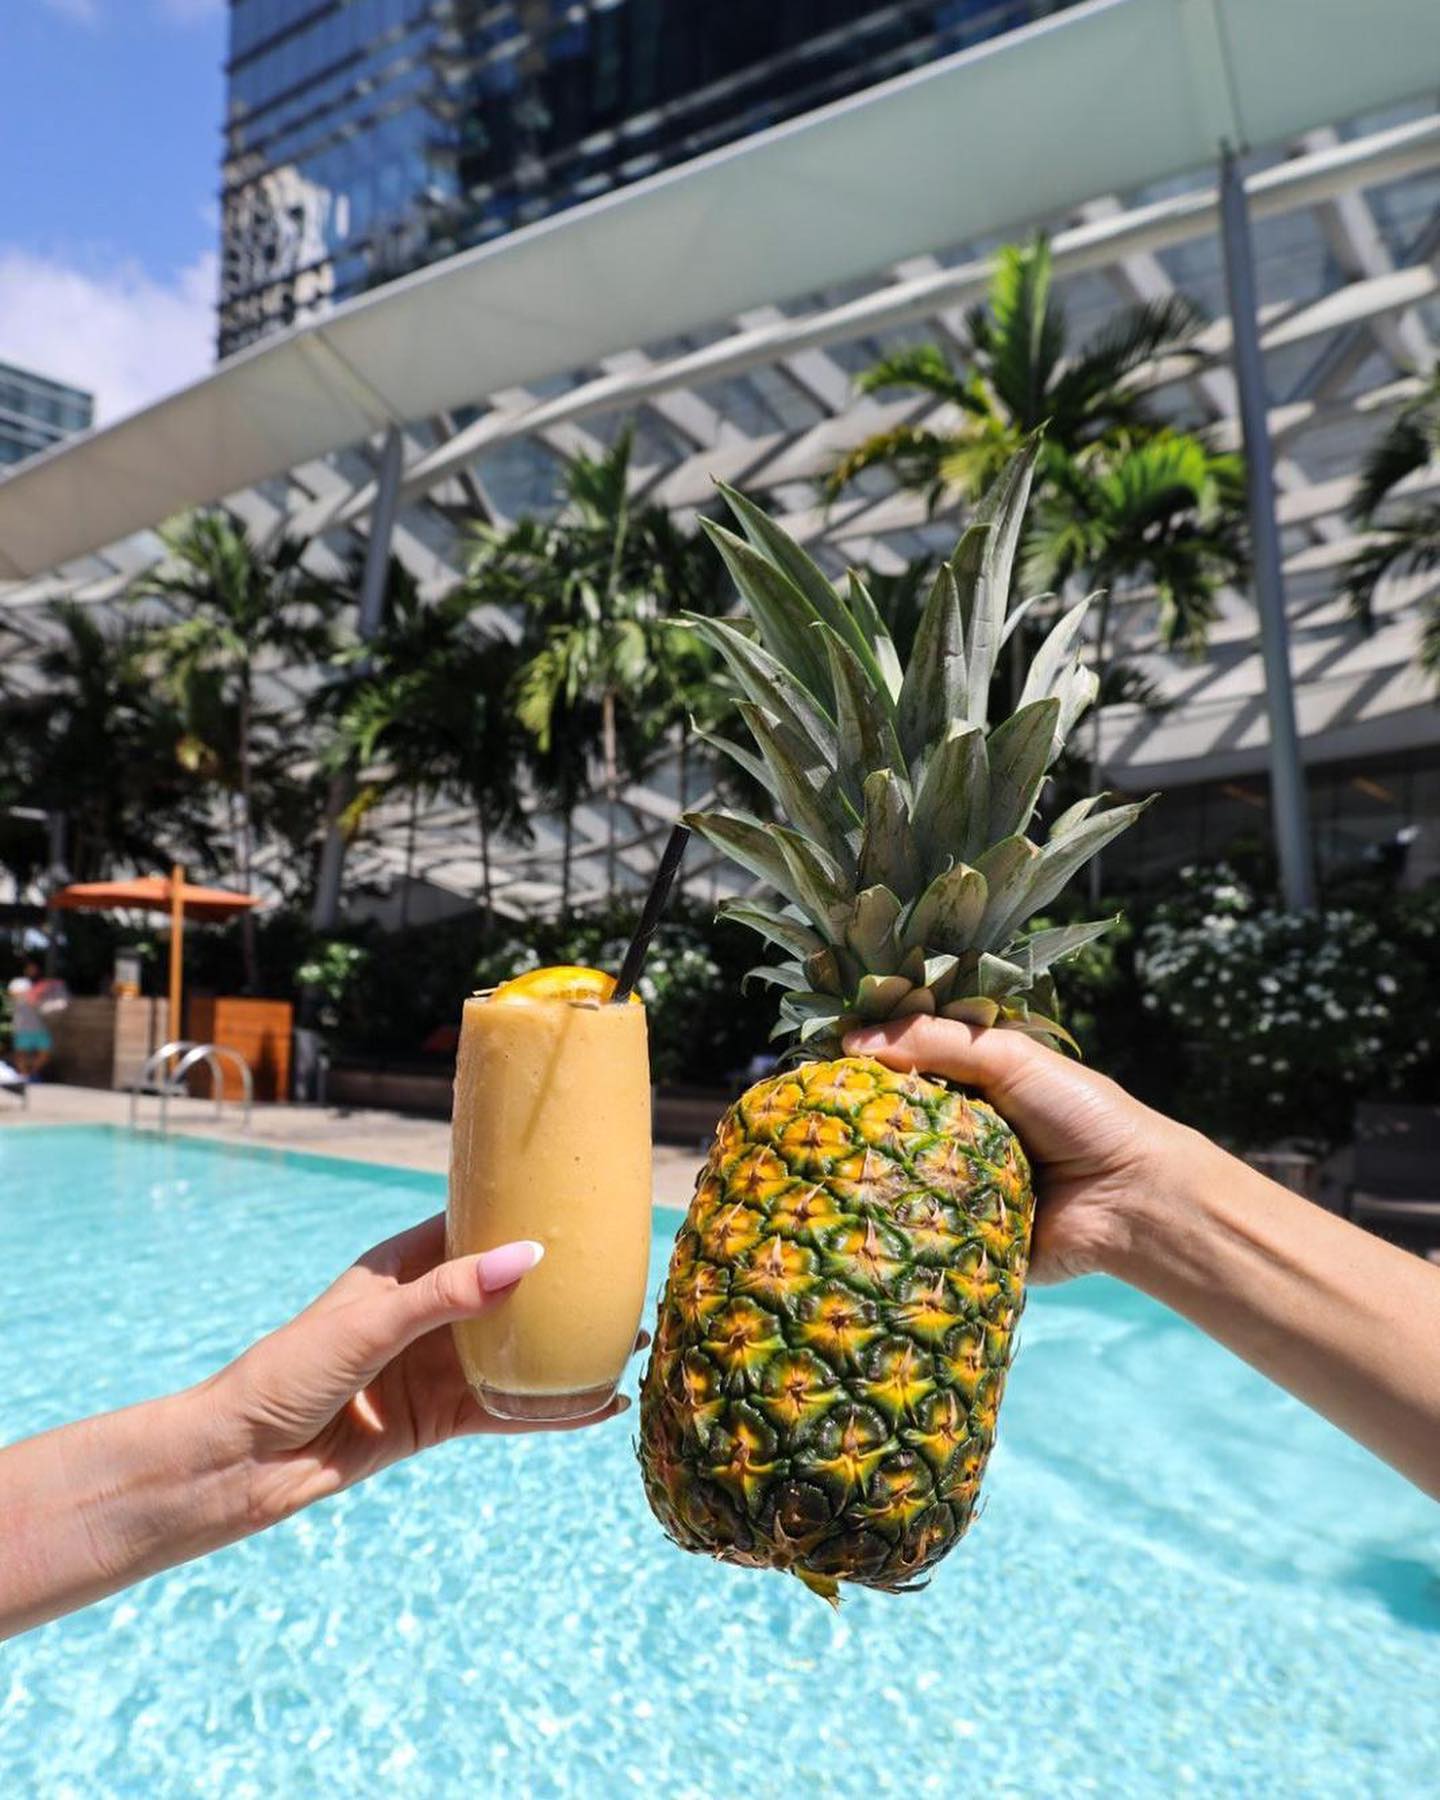 Picture yourself #atEAST relaxing poolside enjoying our plant-based smoothies with flavors such as pineapple, mango, strawberry and coconut.

Celebrating International Pineapple Day today, we are proud to be a member of @preferredhotels offering unique experiences and inspiring guests to explore the world and live a healthy lifestyle.

#ThePreferredLife
#InternationalPineappleDay